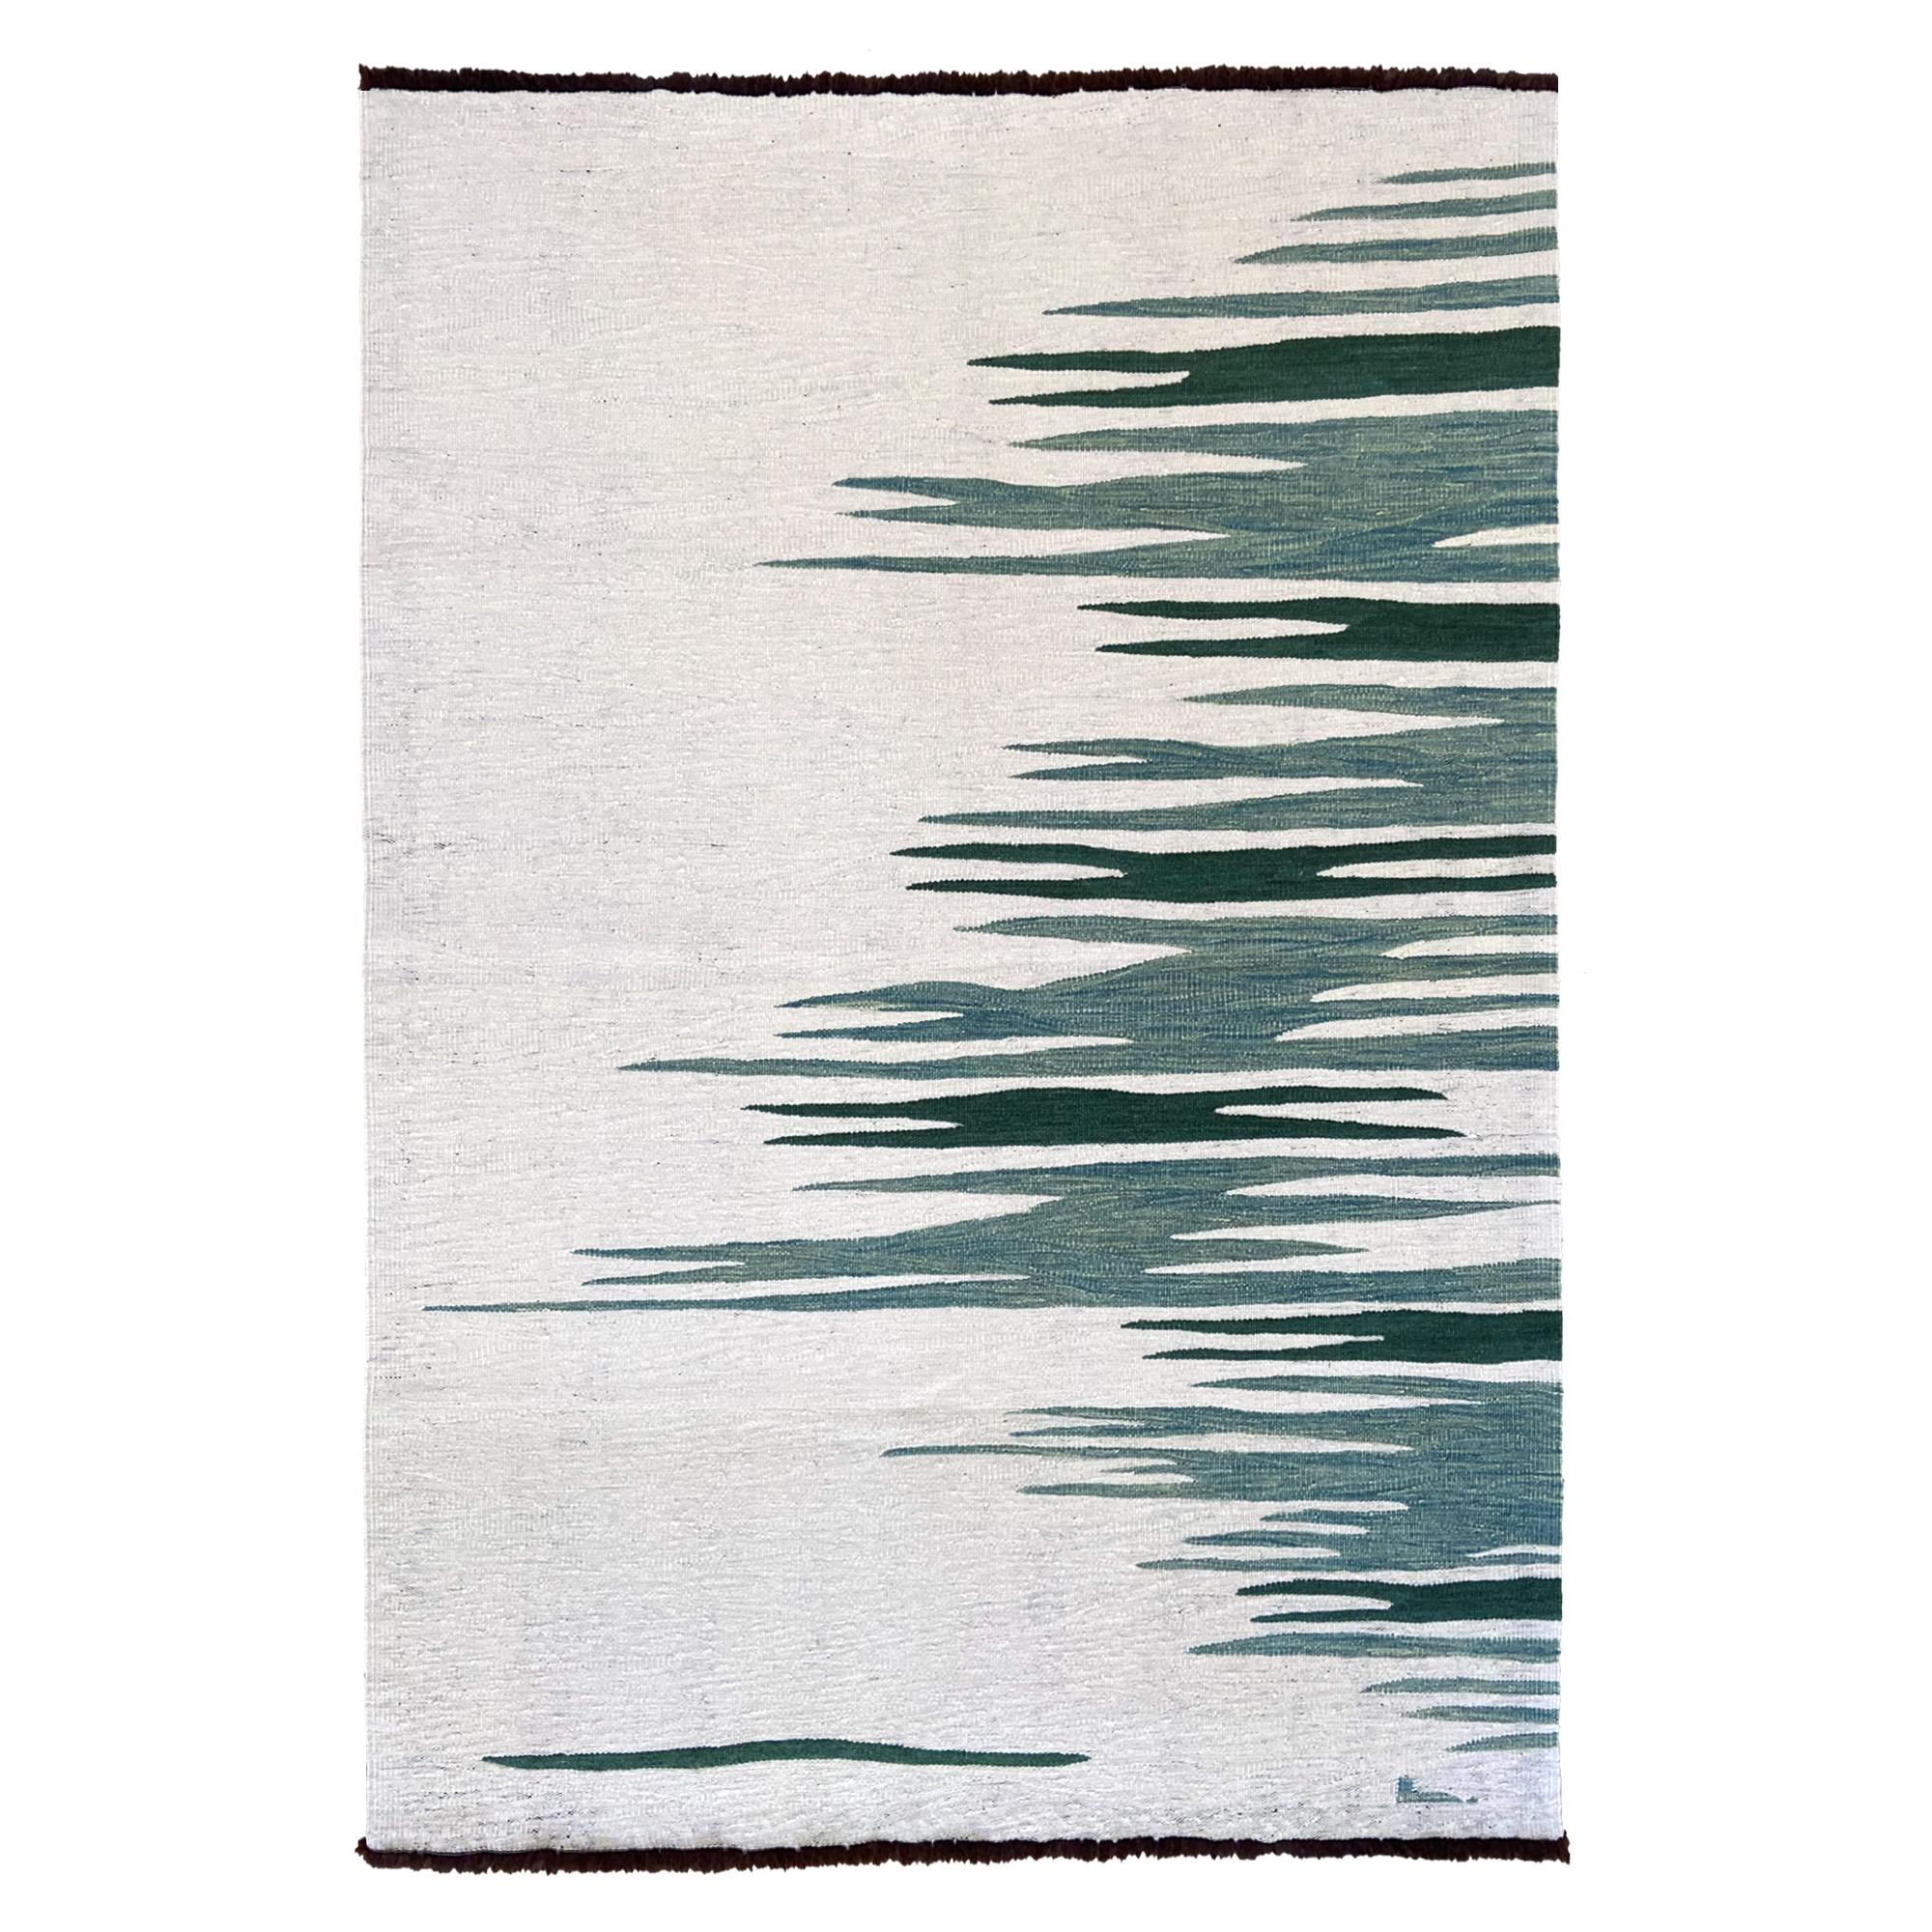 Ege No 2 Contemporary Modern Kilim Rug, Wool Handwoven Dune White and Green